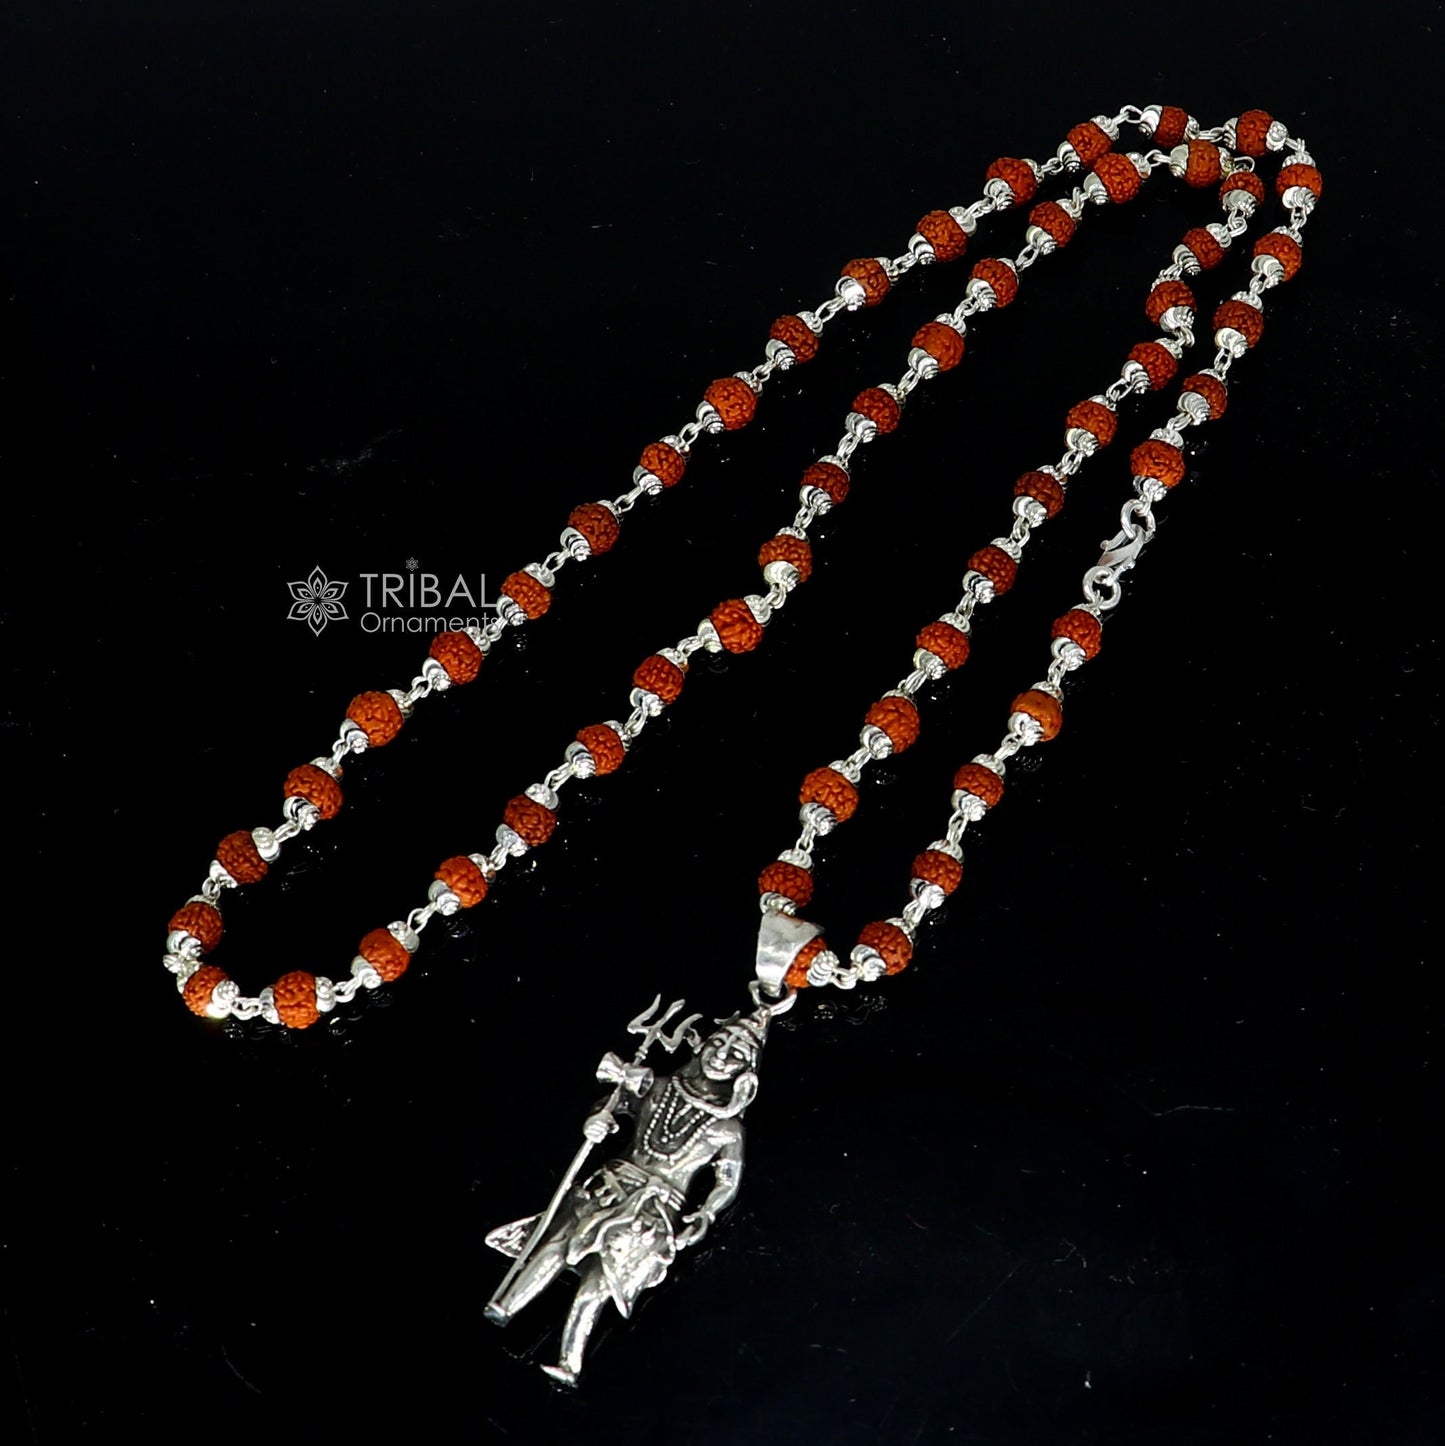 925 sterling silver handmade Divine Lord shiva with trident pendant & Rudraksha chain, holy pendant protect from negative energy nsp756 - TRIBAL ORNAMENTS